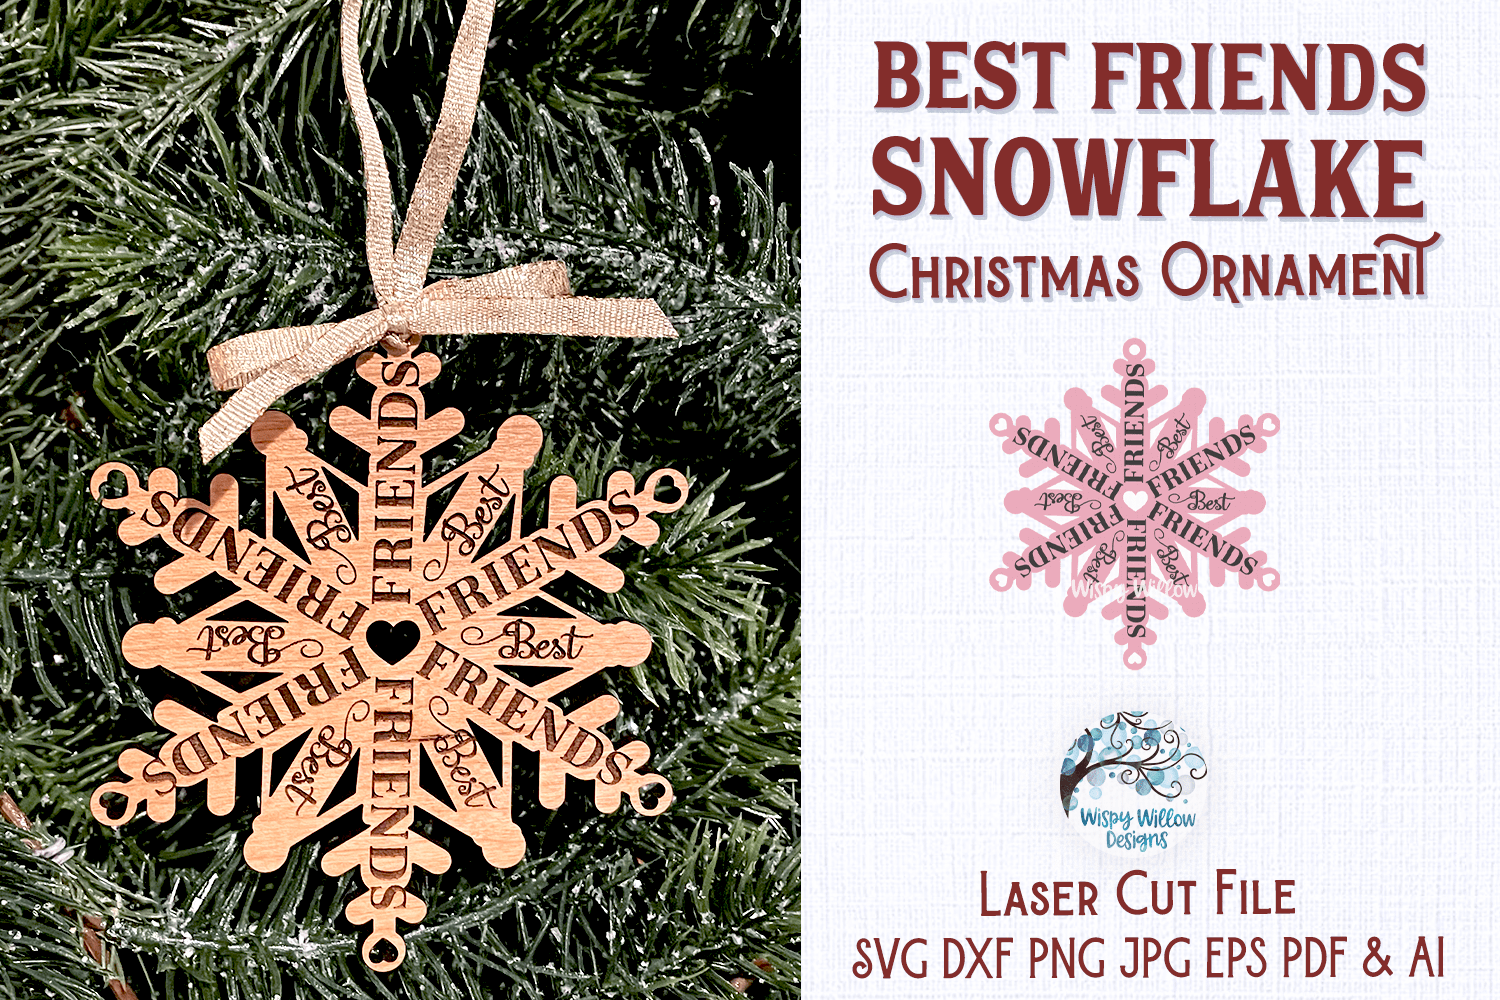 Best Friends Snowflake Christmas Ornament for Glowforge or Laser Cutter Wispy Willow Designs Company